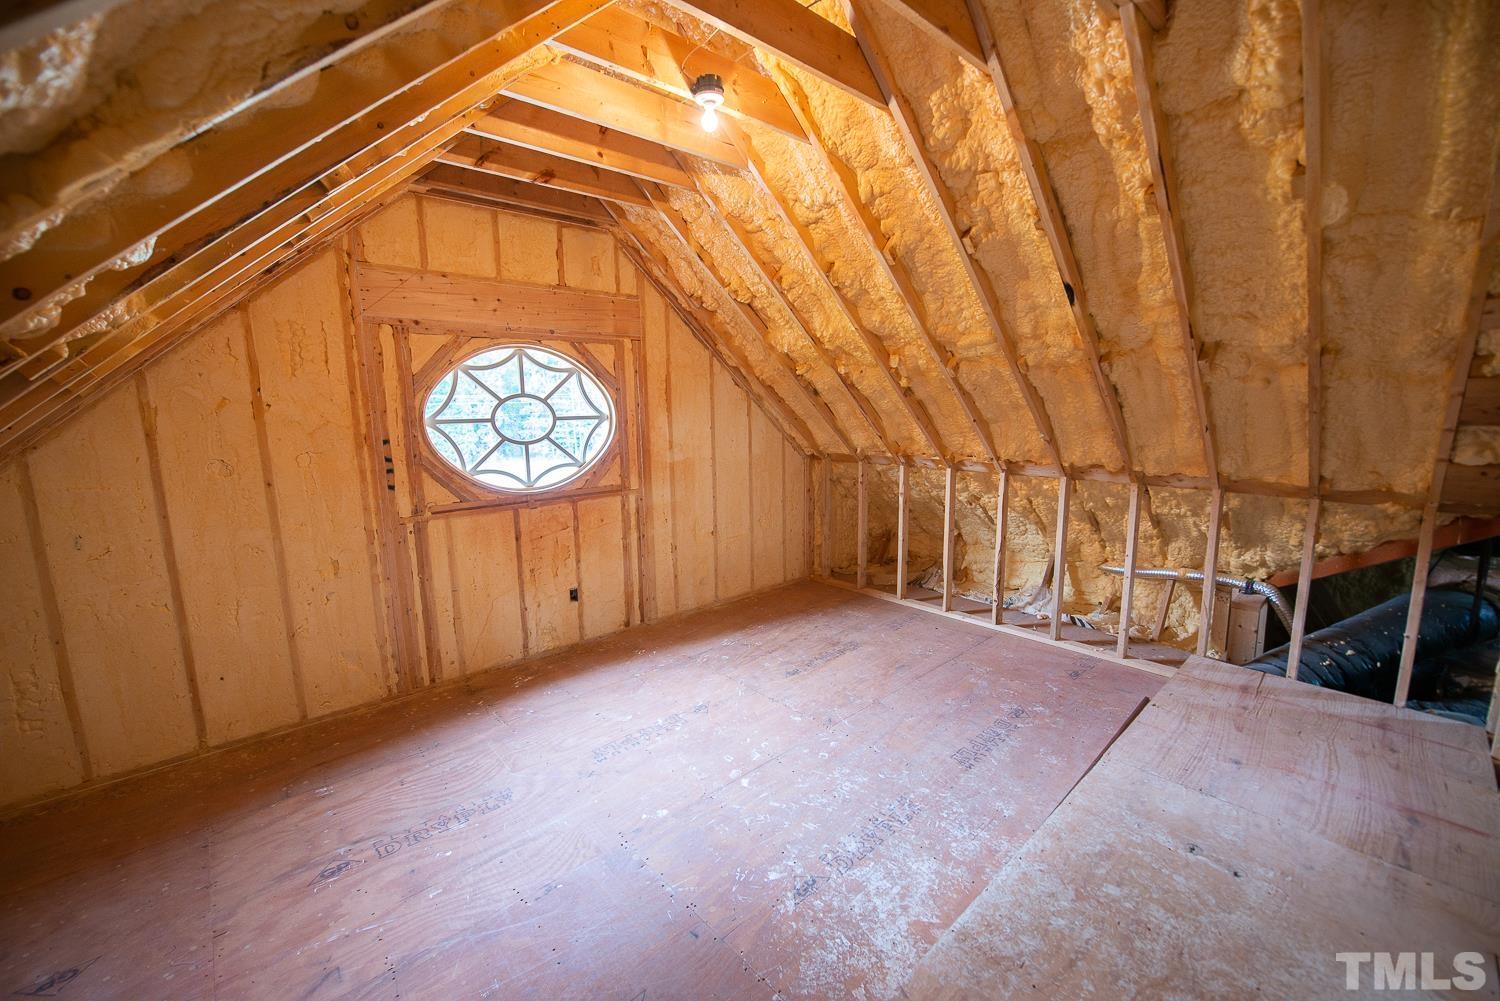 This attic is off from the bonus room. There are 7 attic spaces in the home. This is one that could be finished into expandable space in the future. You can also see the spray foam insulation in the walls. It keeps the attic cooler in the summer months.